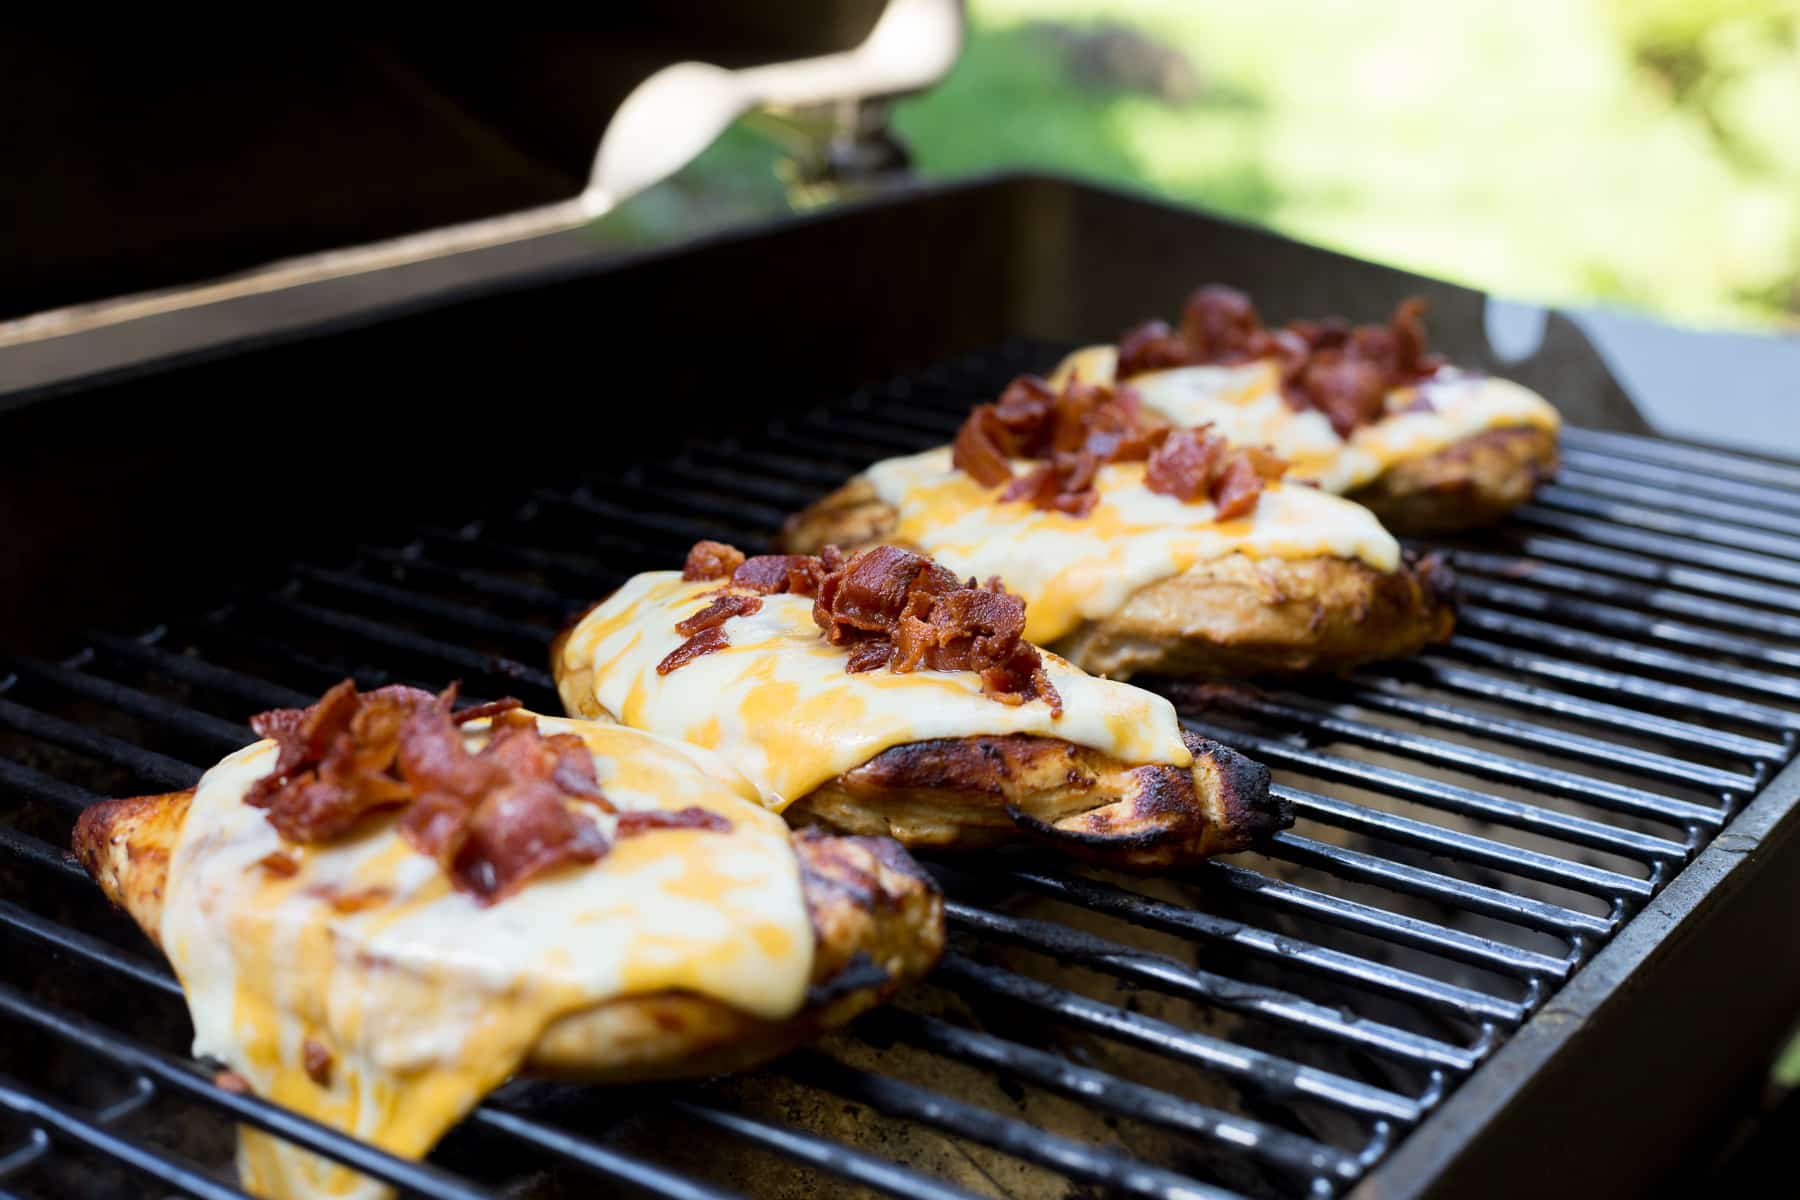 This easy-cheesy grilled Monterey Chicken recipe is THE BEST. BBQ sauce, cheese, and bacon make it a must-try summer cookout staple. *My kids and husband love this!